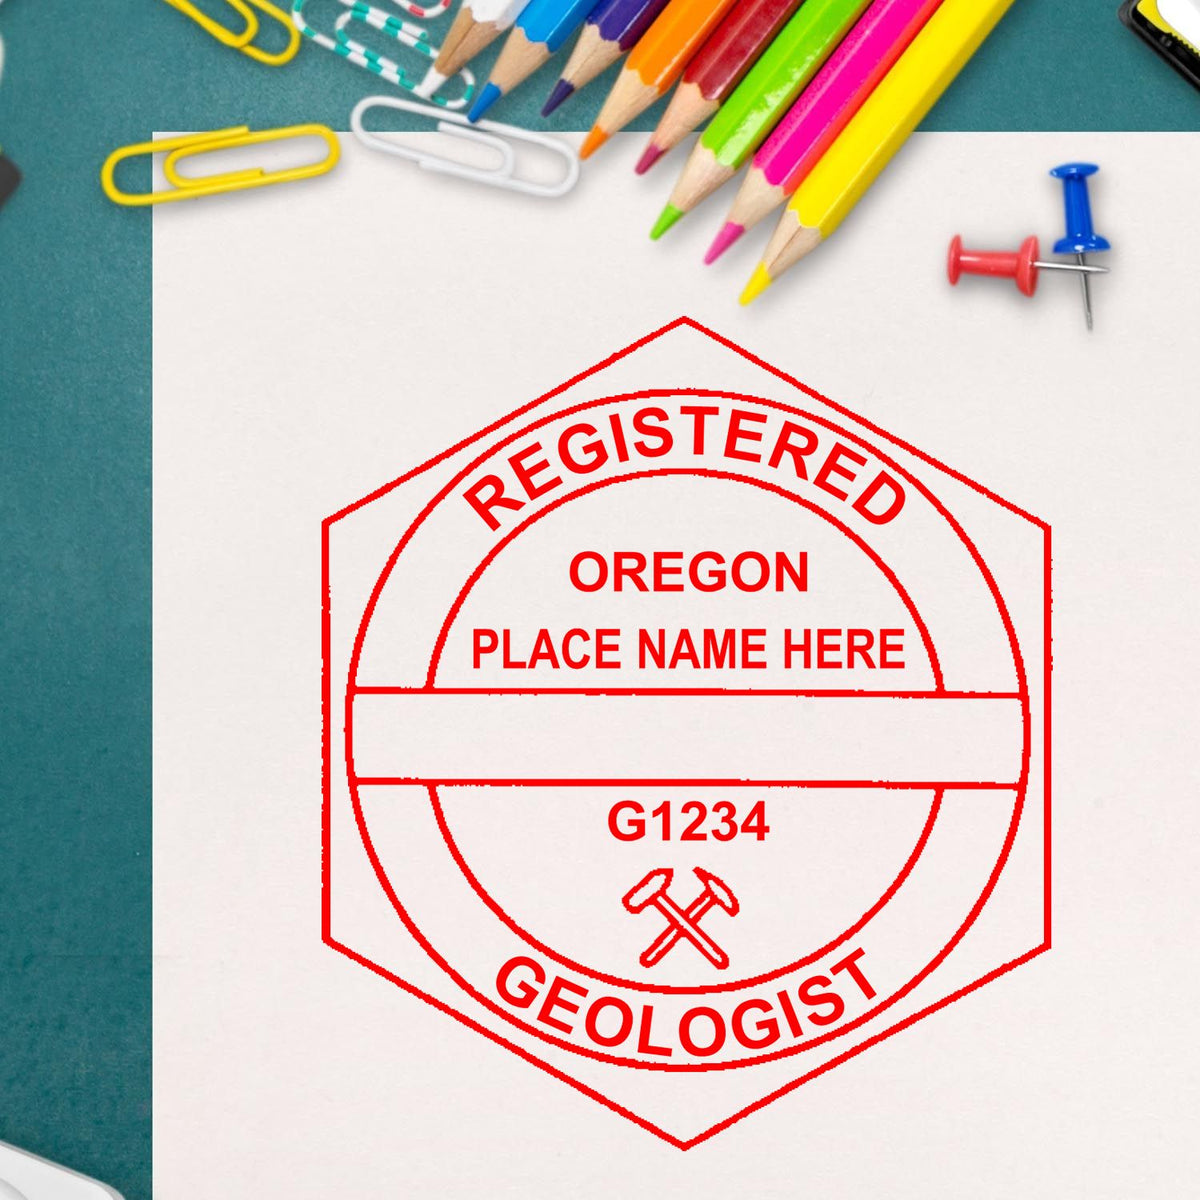 The Digital Oregon Geologist Stamp, Electronic Seal for Oregon Geologist stamp impression comes to life with a crisp, detailed image stamped on paper - showcasing true professional quality.